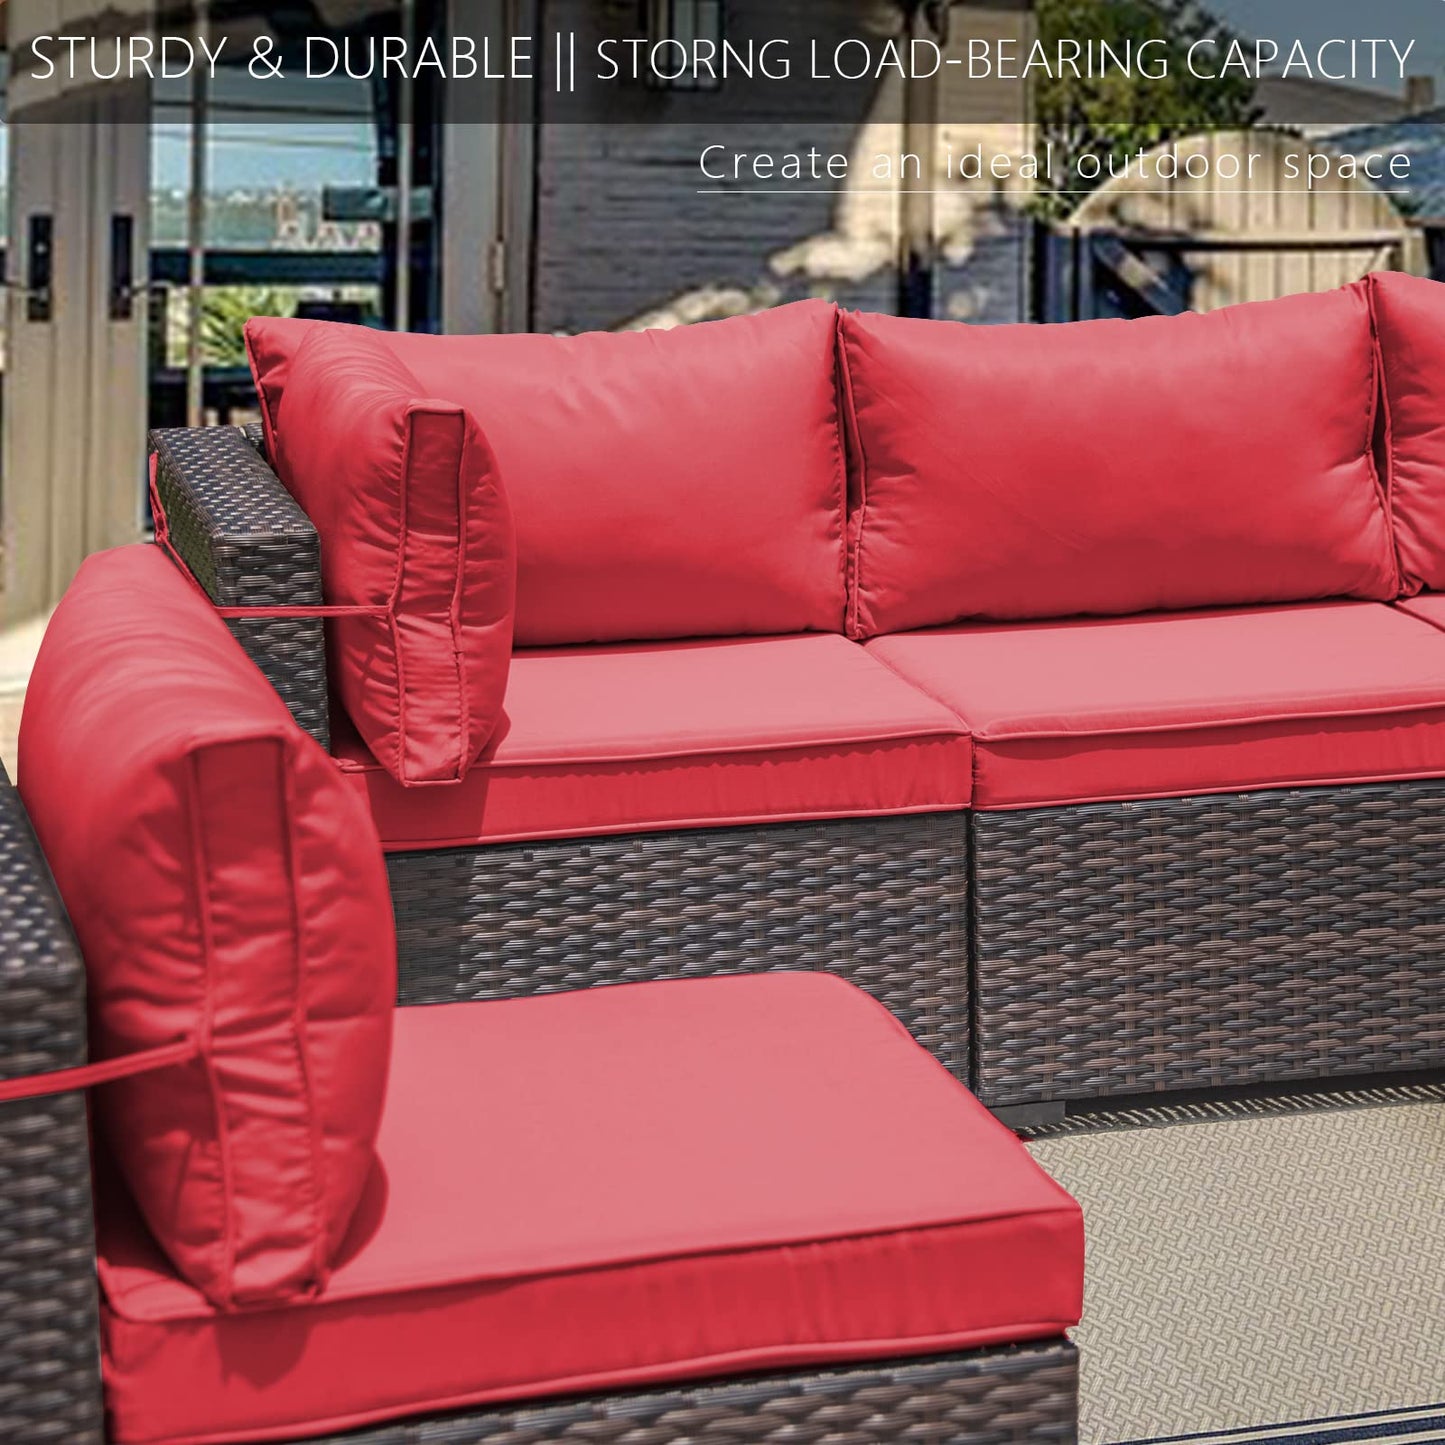 ALAULM 7 Piece Outdoor Patio Furniture Sets, Patio Sectional Sofa - Red